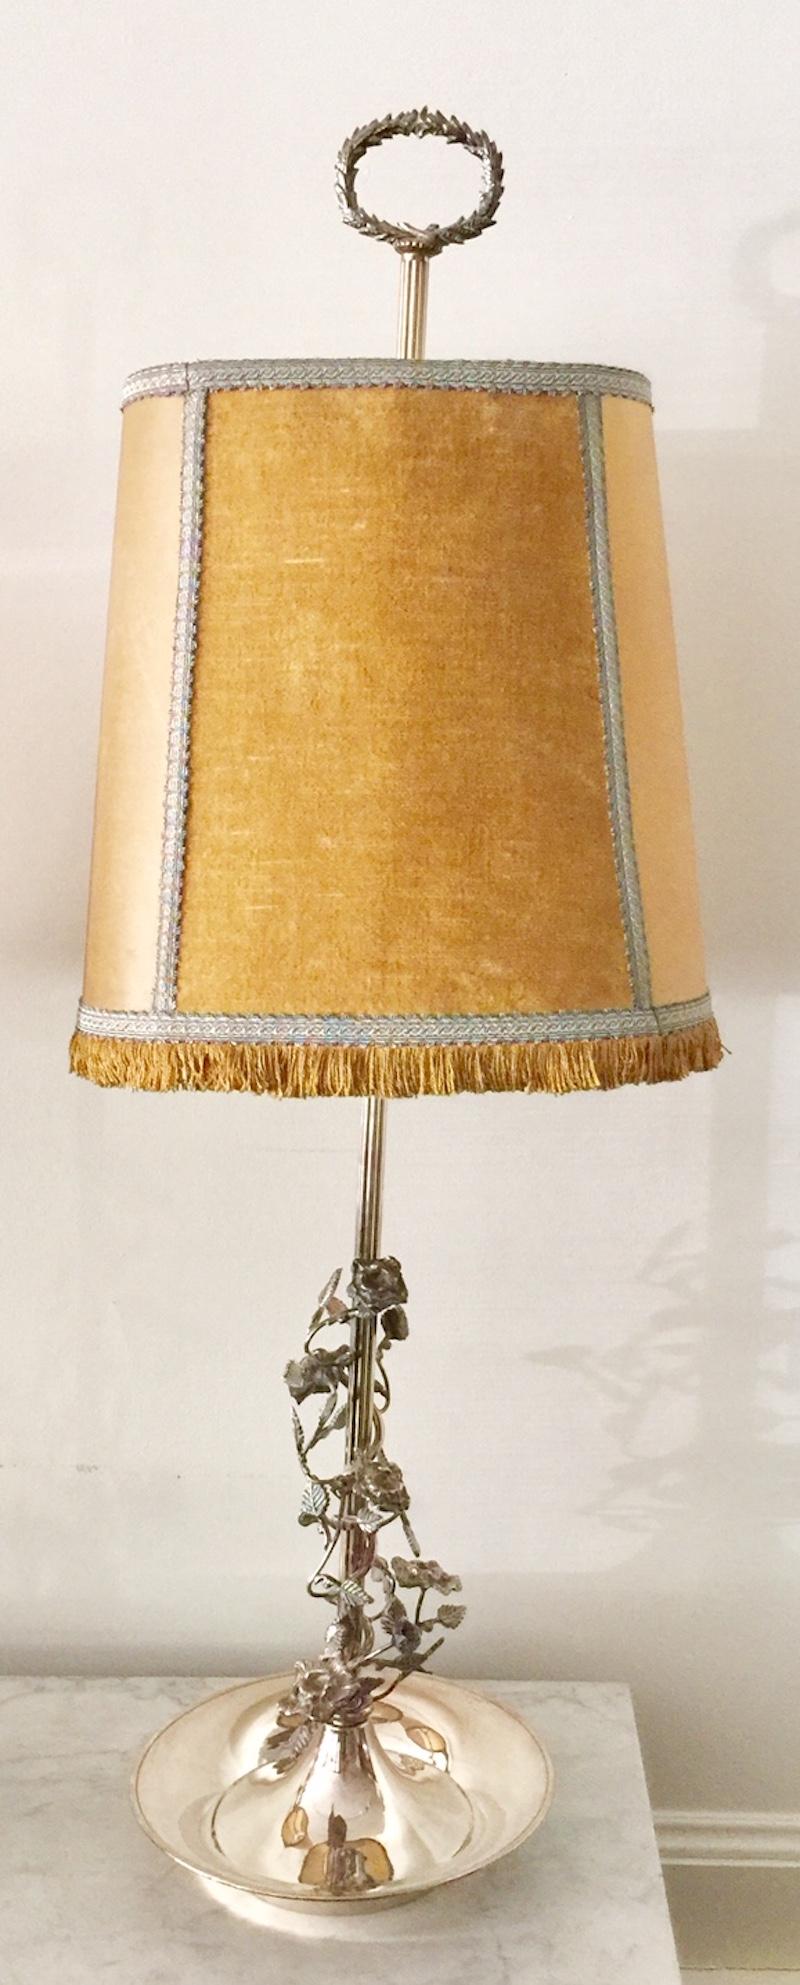 French pair of tall silvered Bouillotte lamps from Aix-en-Provence. The central columns are adorned with a wraparound scroll of silvered metal flower, vinesand leaves. Velvet and parchment shades, passementerie trim. Silvered laurel leaf crown